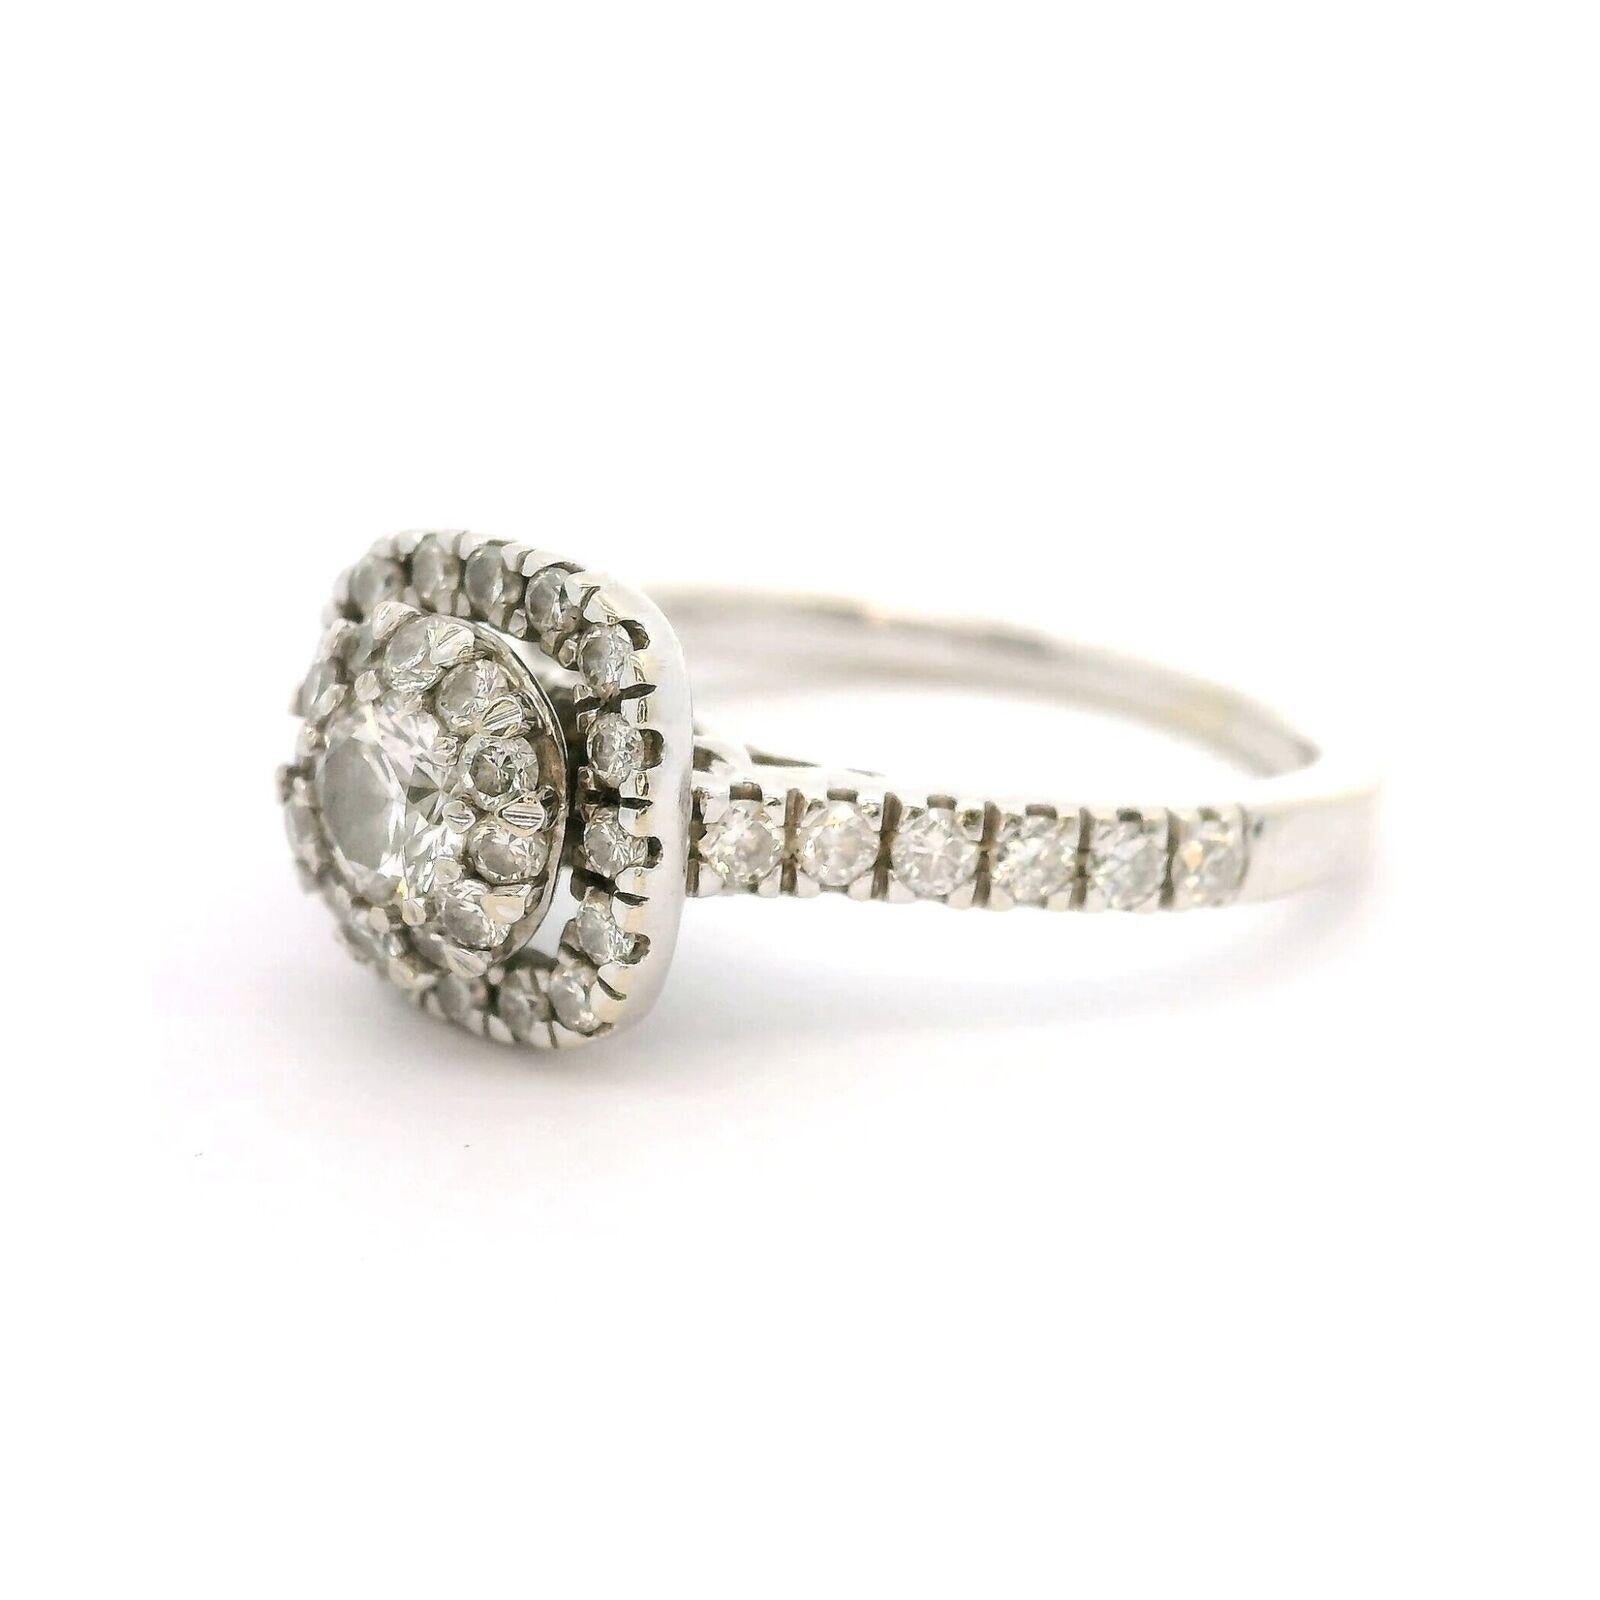 14k White Gold and Diamond Vintage Cluster Halo Ring Size 5.25

Condition:  Excellent Condition, Professionally Cleaned and Polished
Metal:  14k Gold (Marked, and Professionally Tested)
Weight:  3.2g
Diamonds:  Round Cut Diamonds 0.50cttw
Face